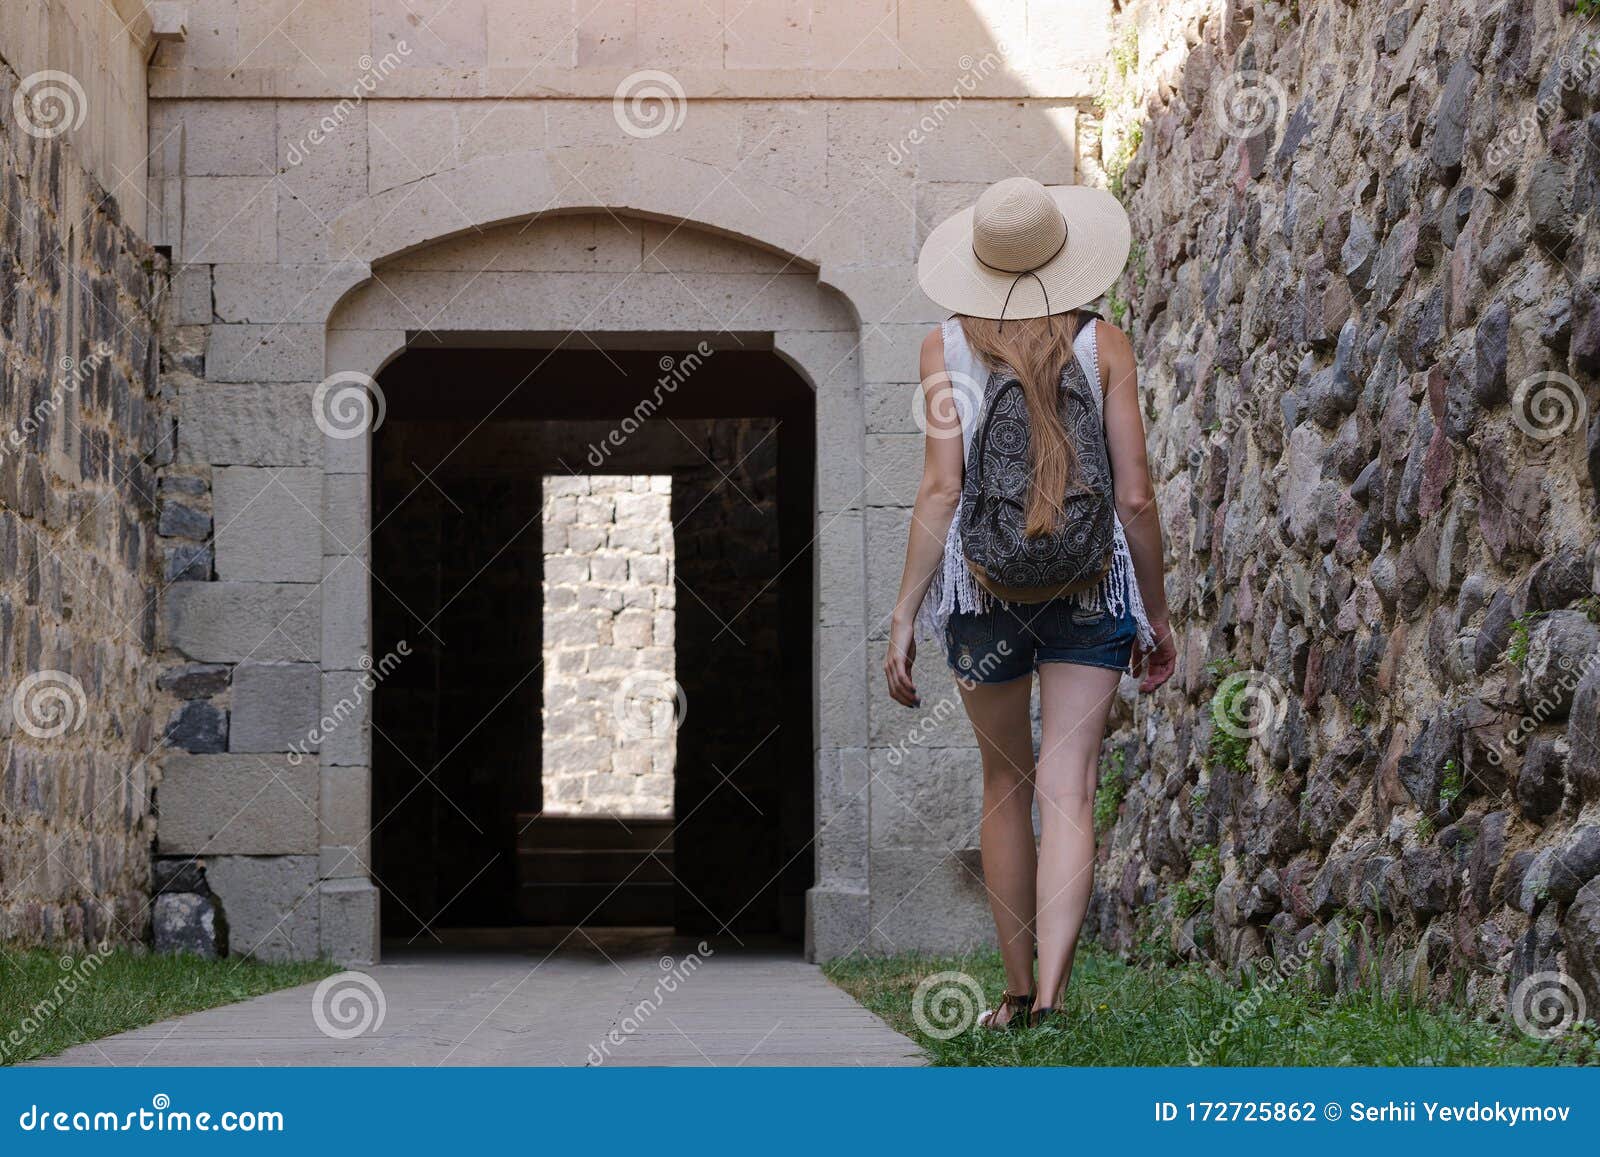 young woman tourist walking on ancient sites. excursions to ancient cities